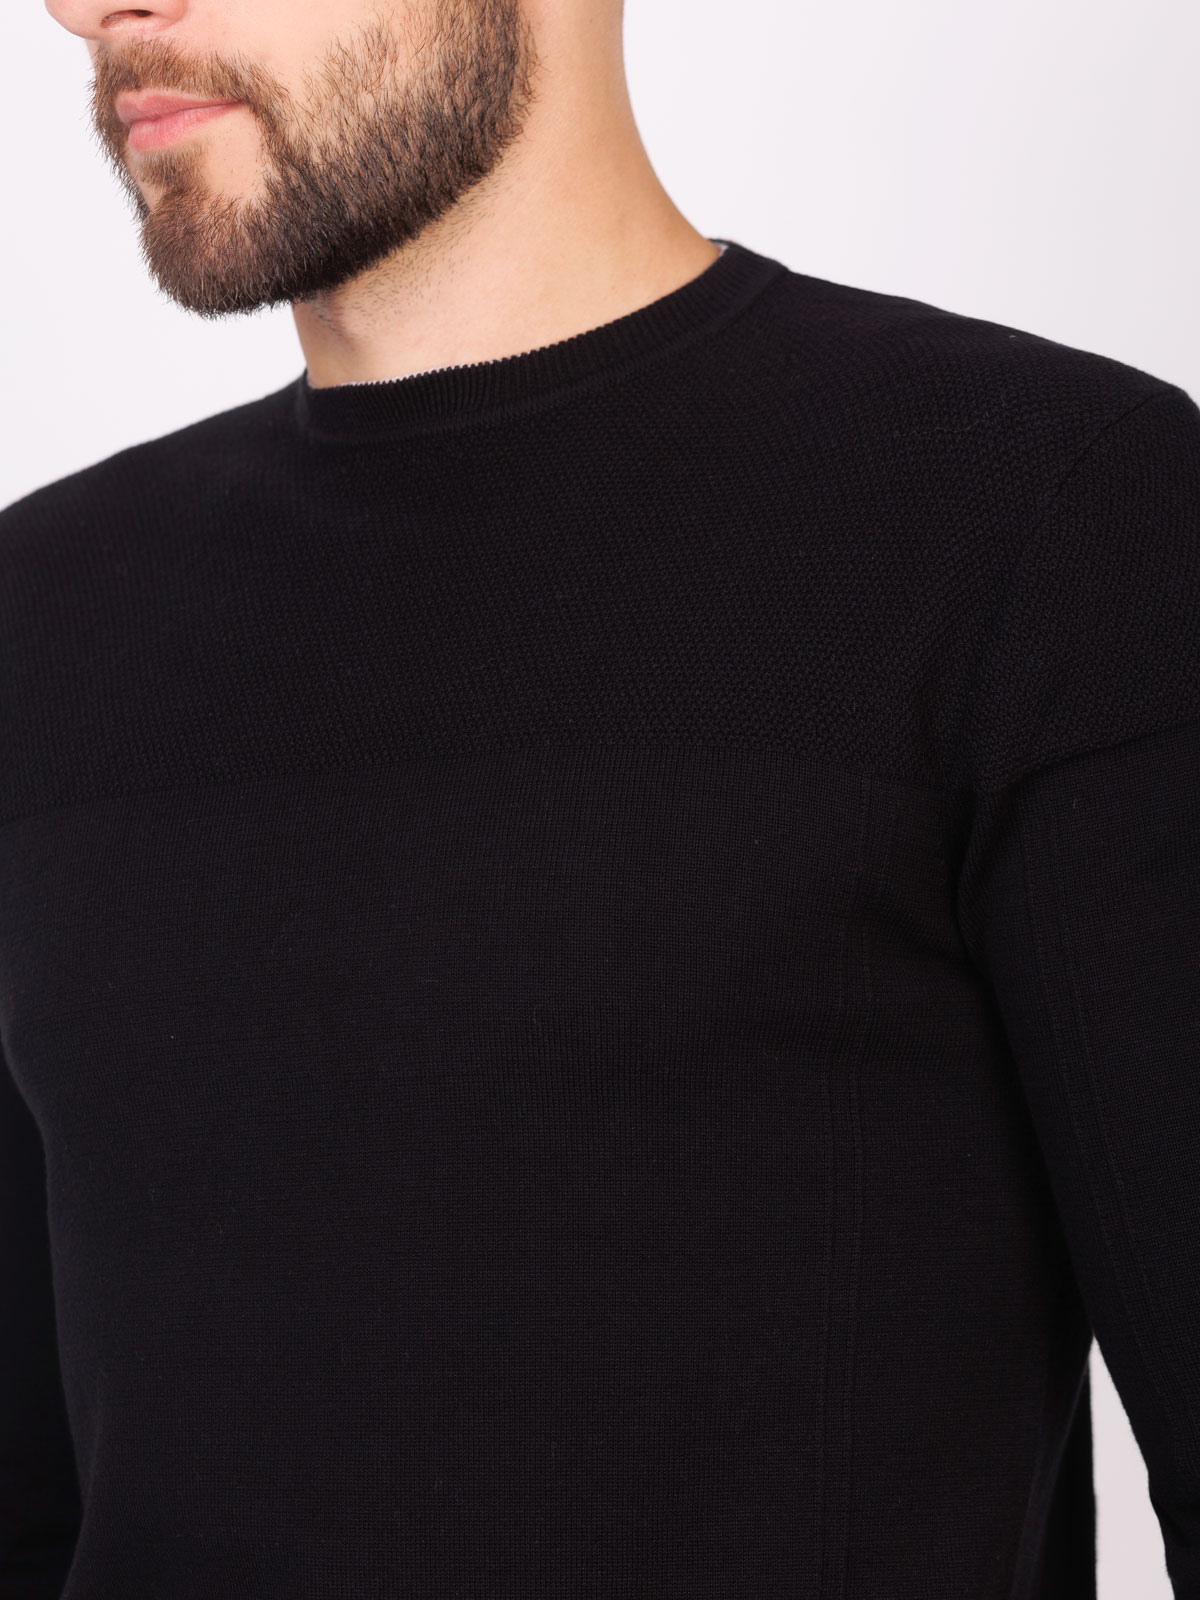 Mens blouse in black color - 35290 € 39.93 img3